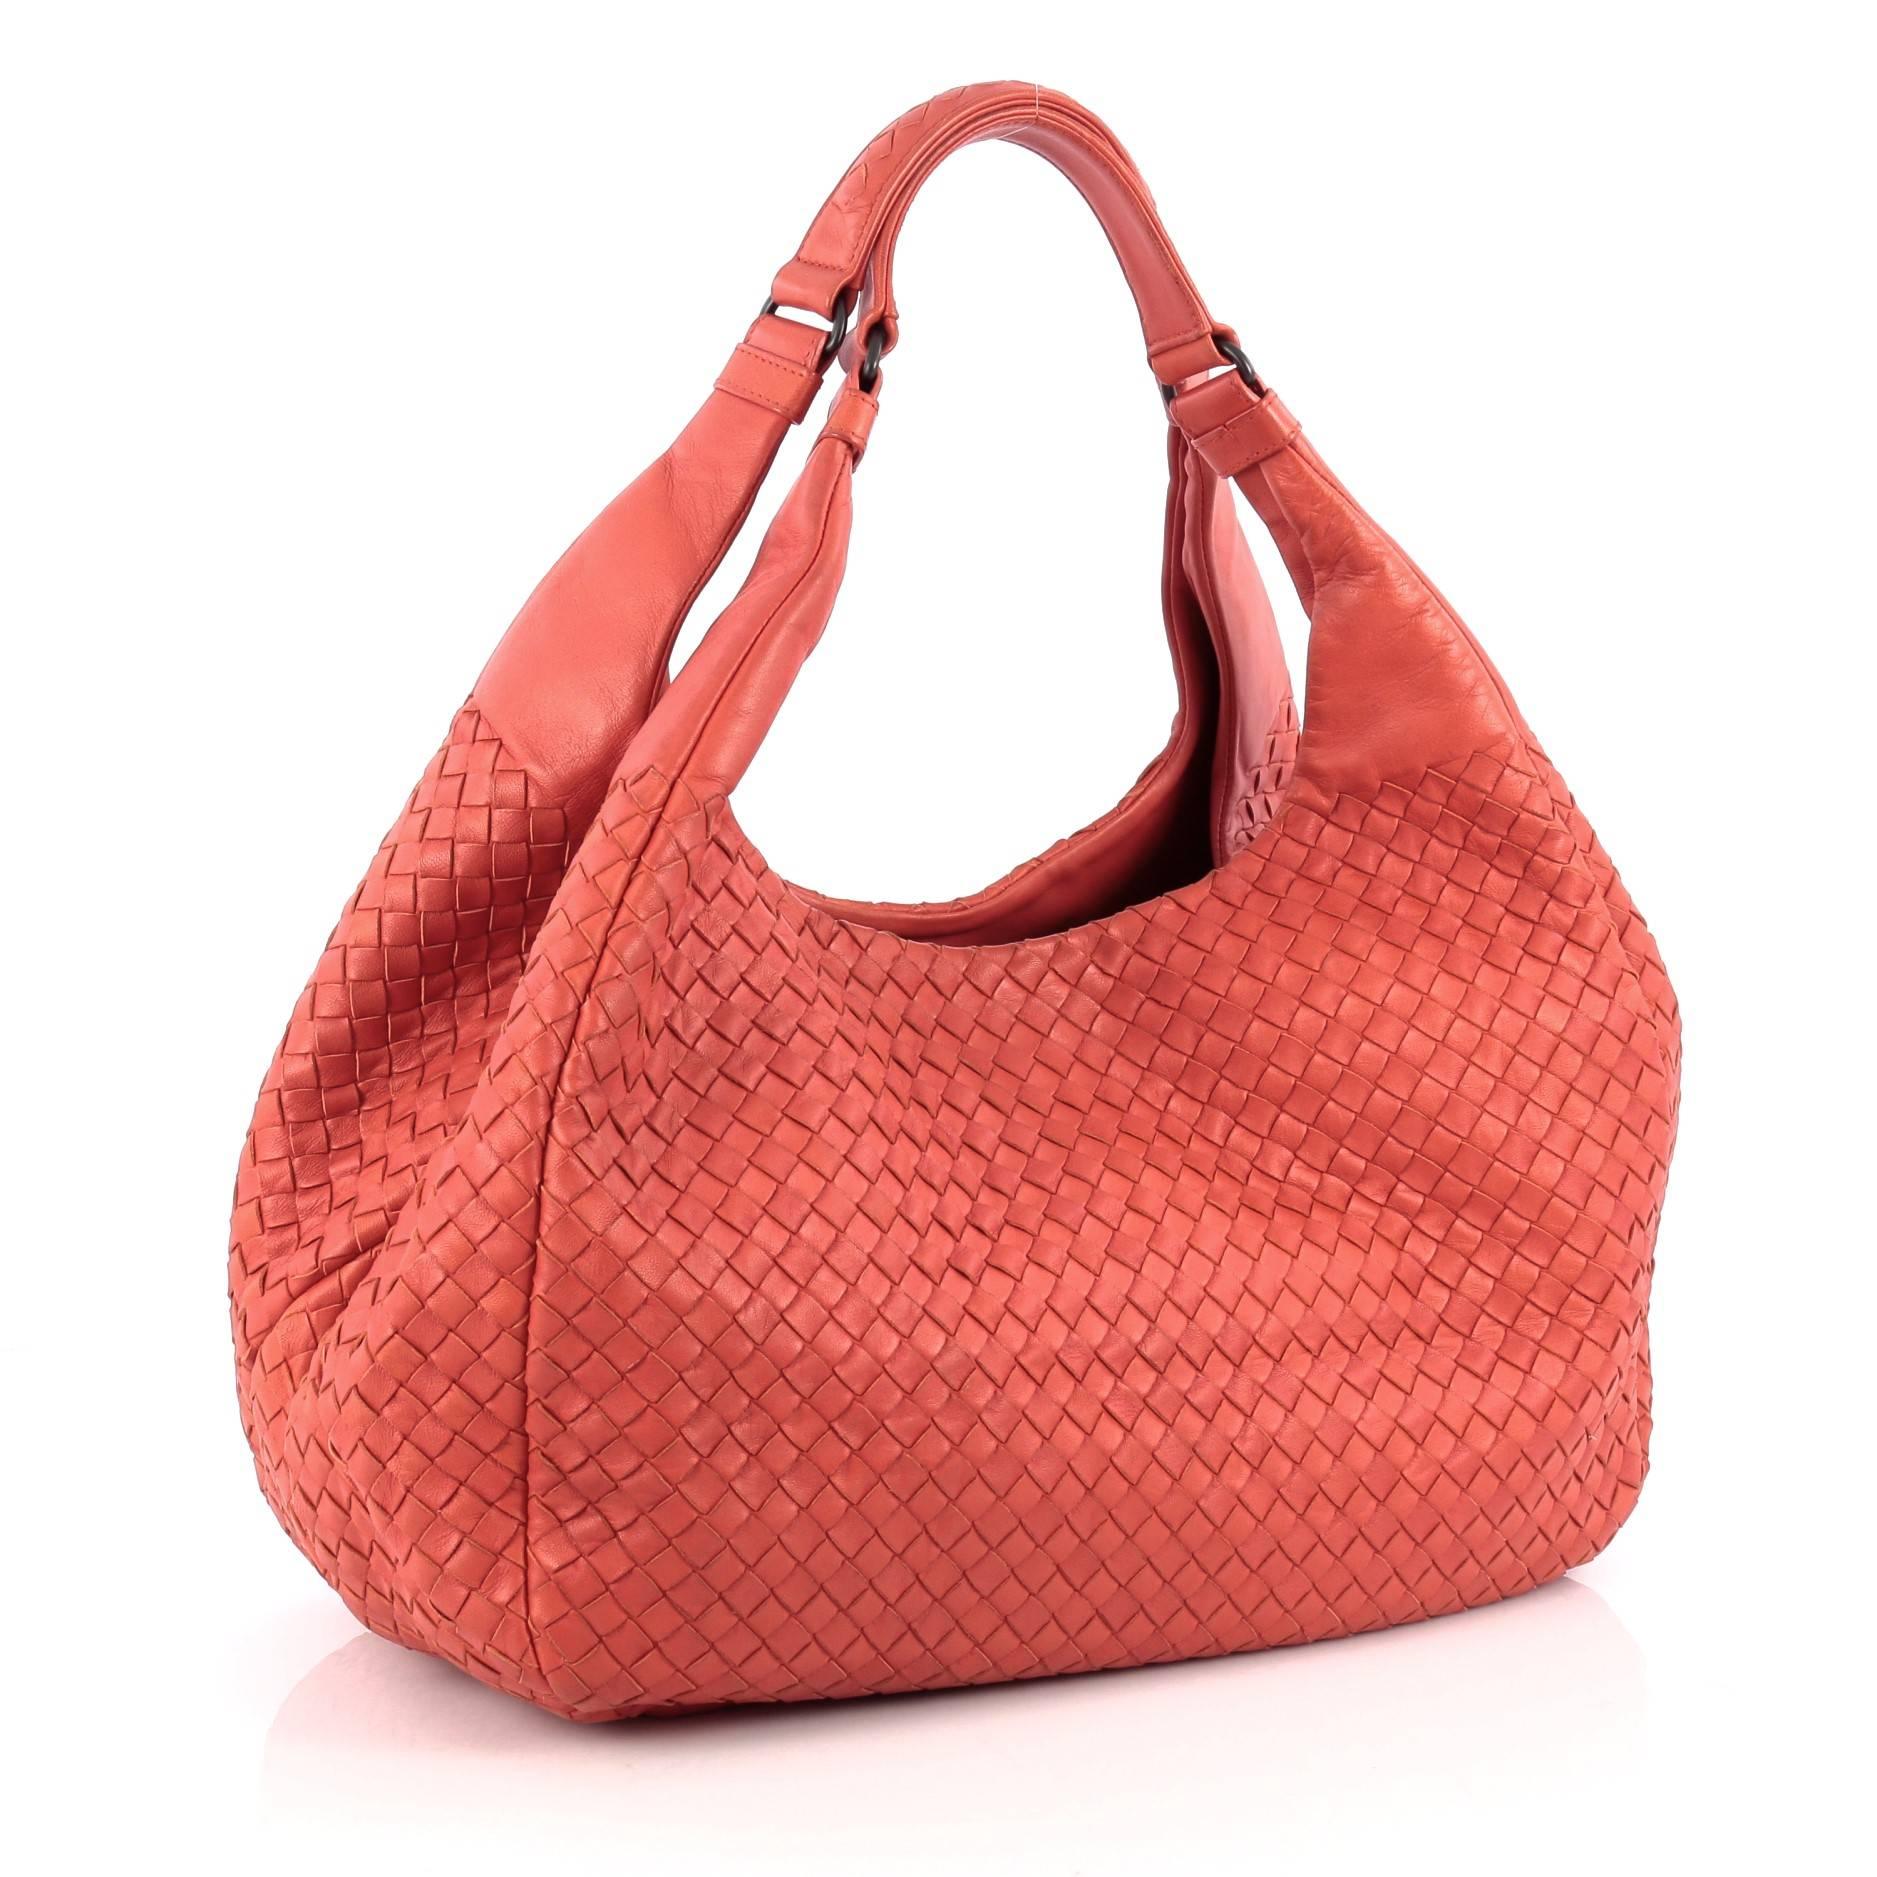 This authentic Bottega Veneta Campana Hobo Intrecciato Nappa Large is both understated yet elegant perfect for the modern woman. Crafted in Bottega Veneta's signature intrecciato woven red nappa leather, this functional shoulder bag features dual